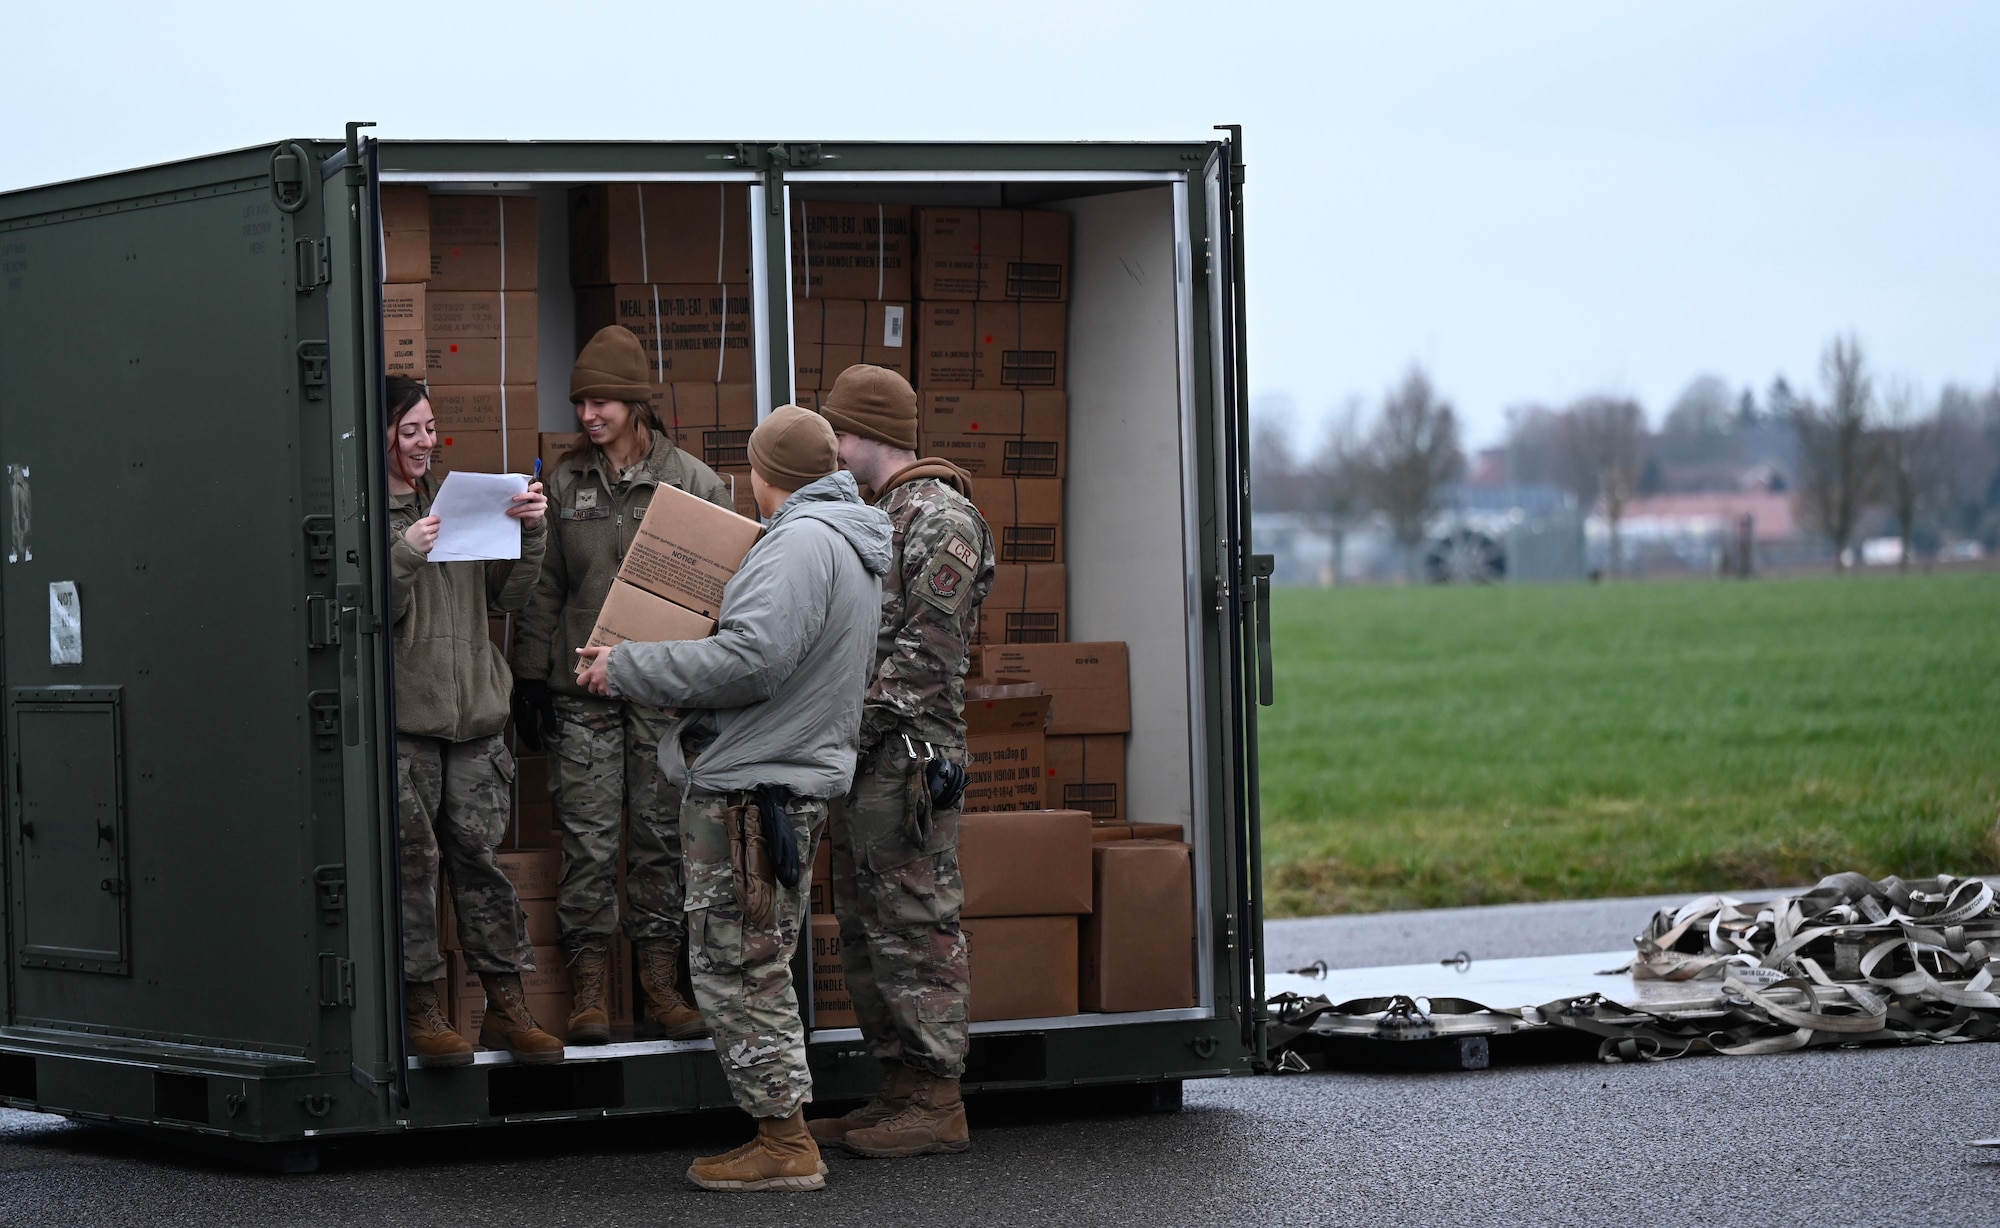 Members of the 435th Contingency Response Group hand out a box of Meals Ready-To-Eat for use during Exercise Agile Bison 23-1 at Chièvres Air Base, Belgium, March 7, 2023.  During the exercise, the 435th CRG trains to establish an expeditionary airfield using NATO allies and partner bases along with the group’s own personnel, logistics and equipment, while also maintaining force protection during high threat levels.